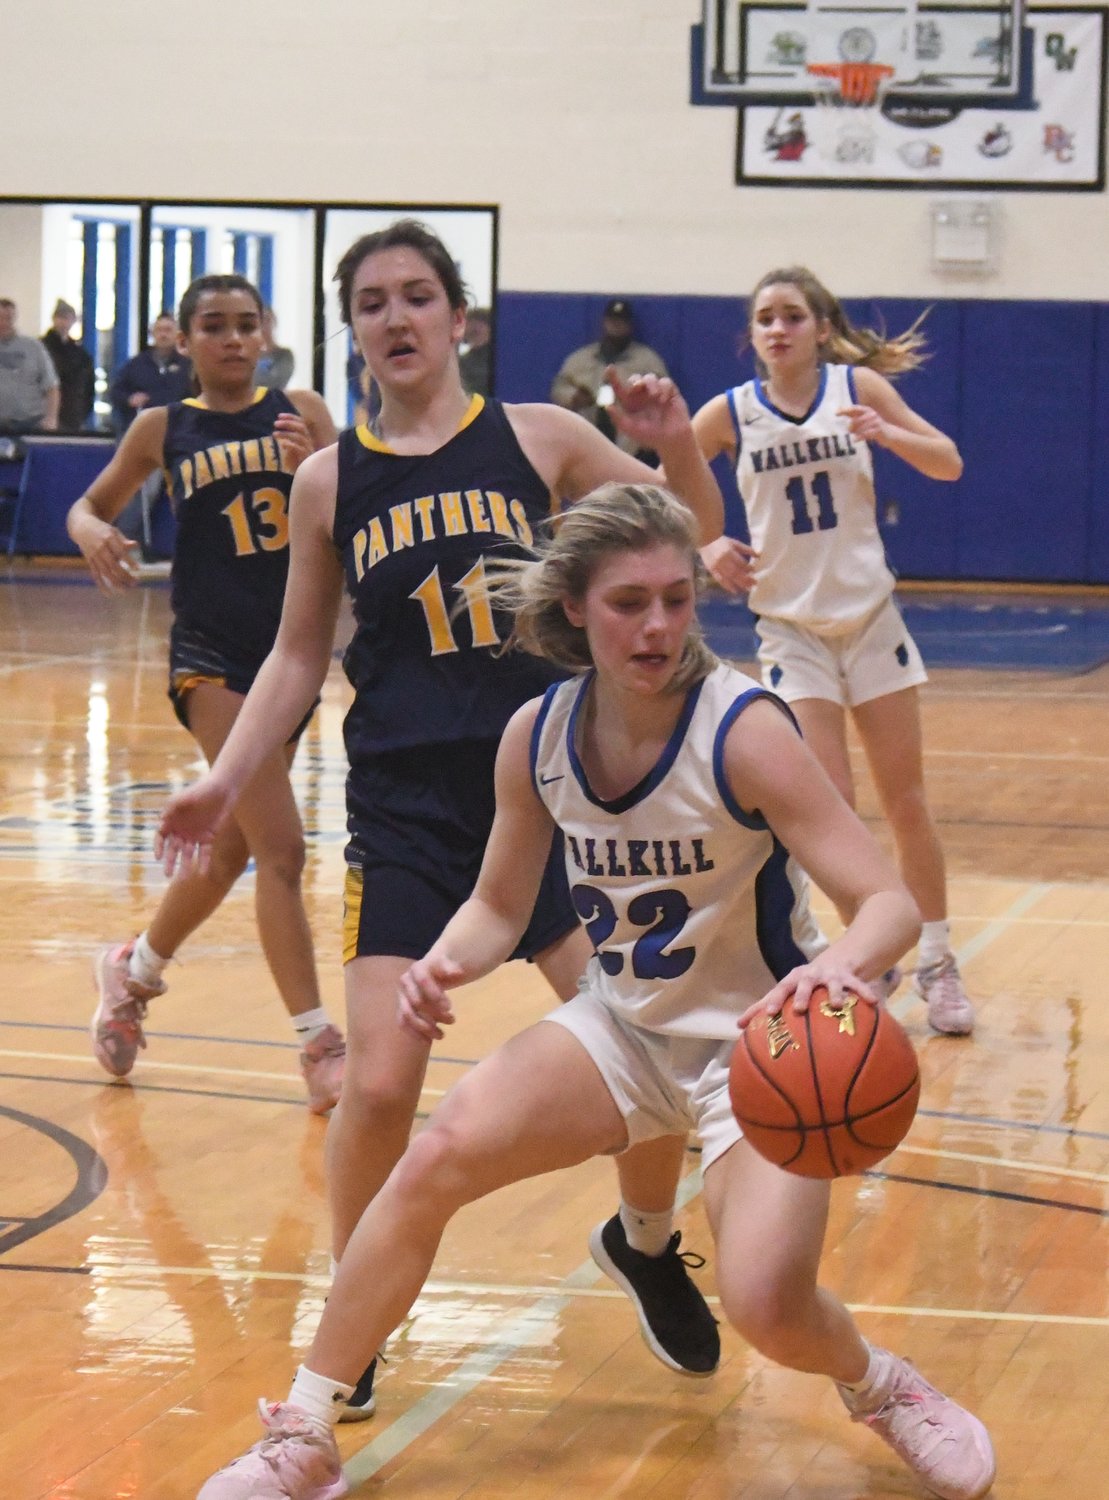 Wallkill's Emma Spindler dribbles the ball as Walter Panas' Sarah Chiulli defends and Sophia Tavarez and Wallkill's Zoe Mesuch look on during Saturday's NYSPHSAA Class A regional final at Mount Saint Mary College in Newburgh.